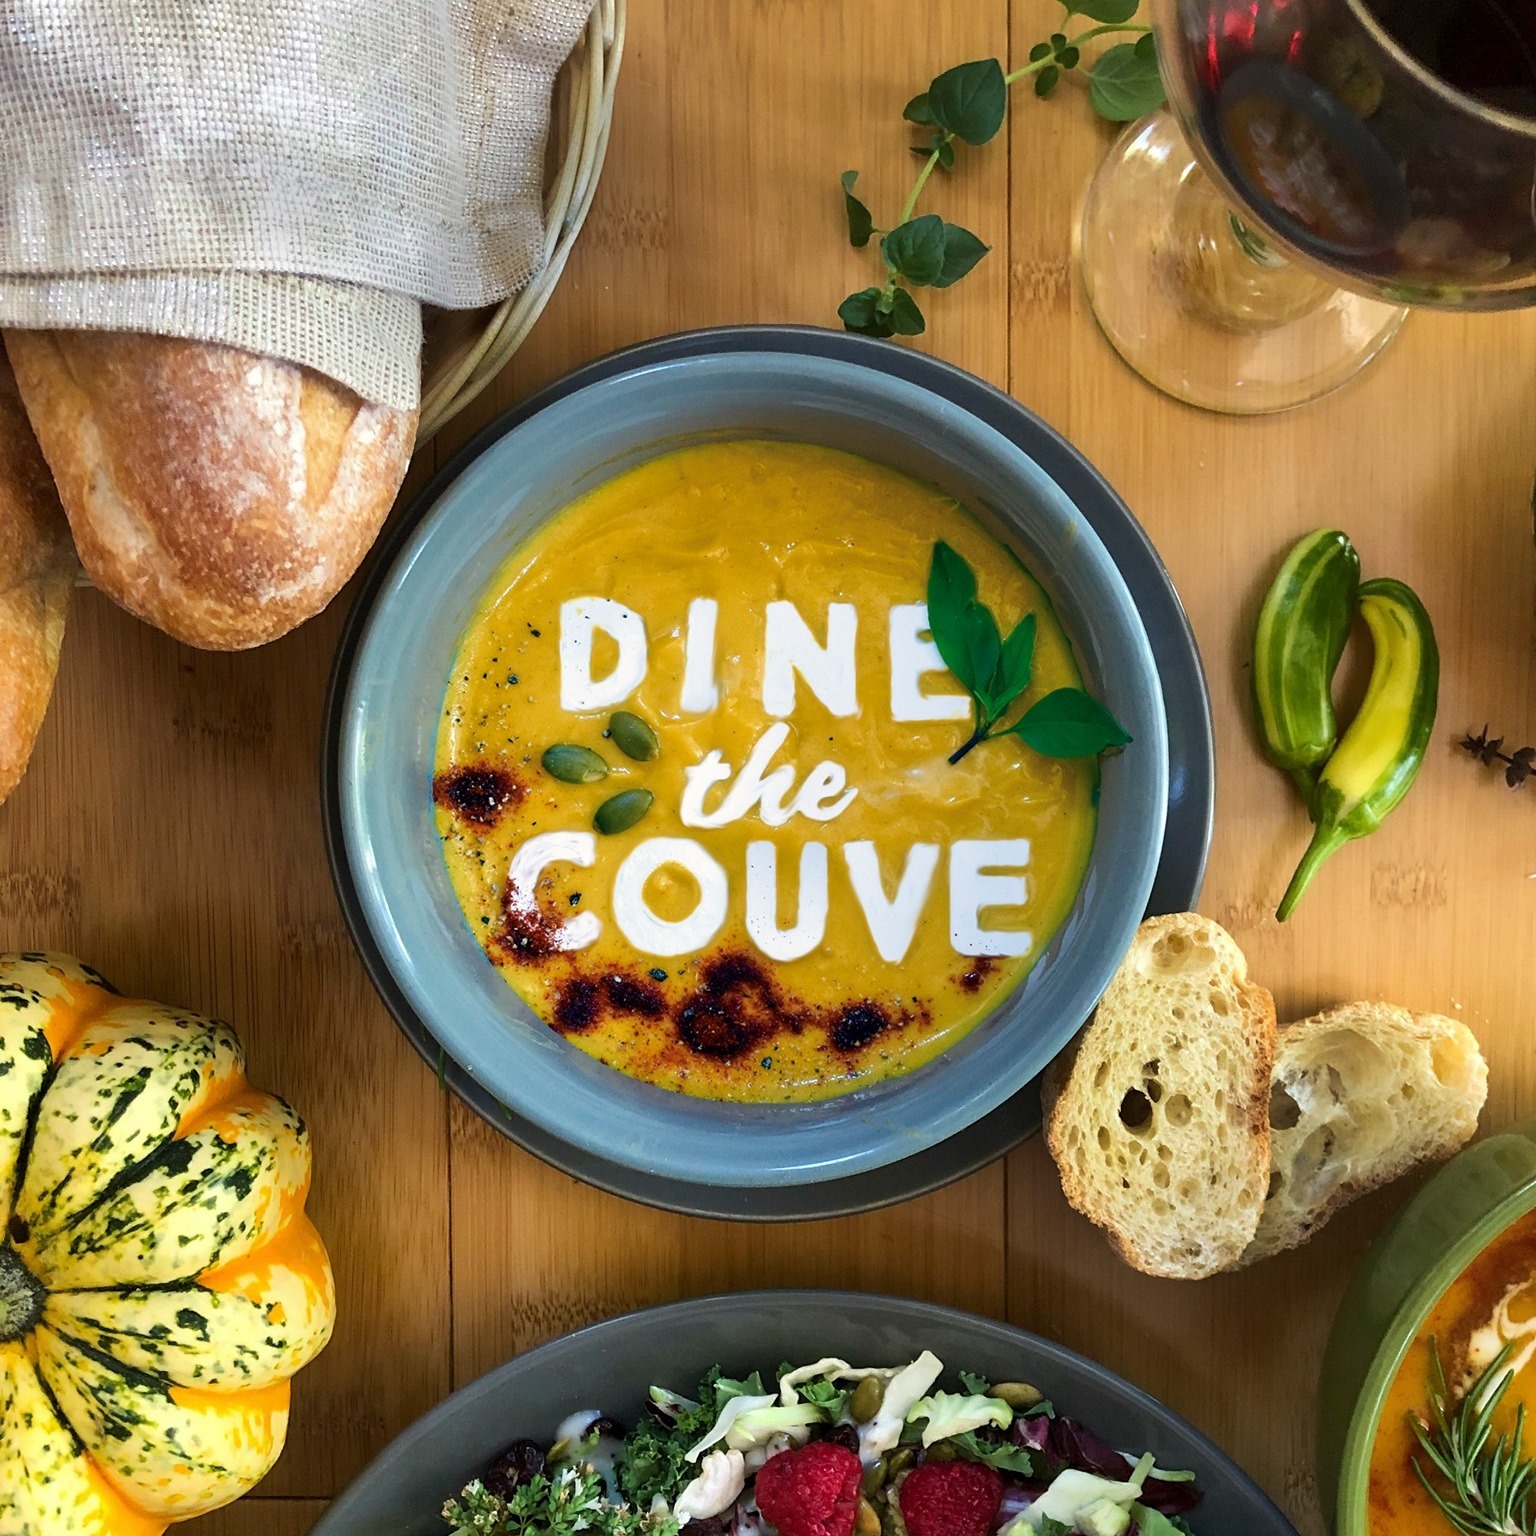 Dine the Couve has returned this month Vancouver Business Journal